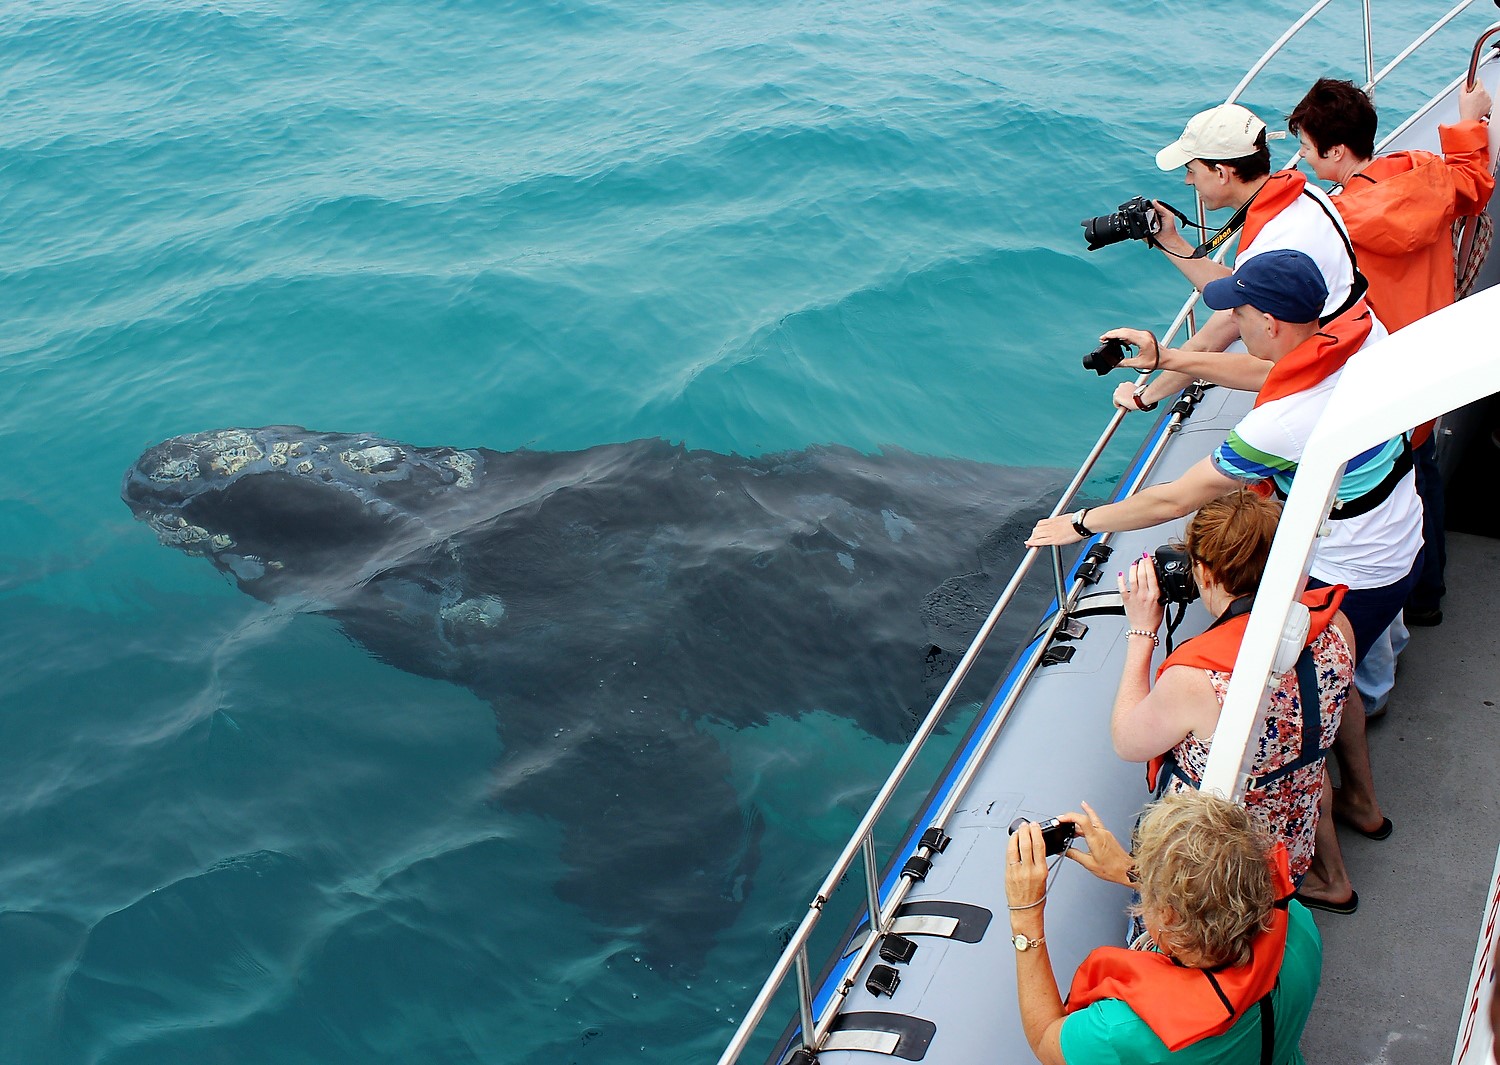 whale watching tour from hermanus